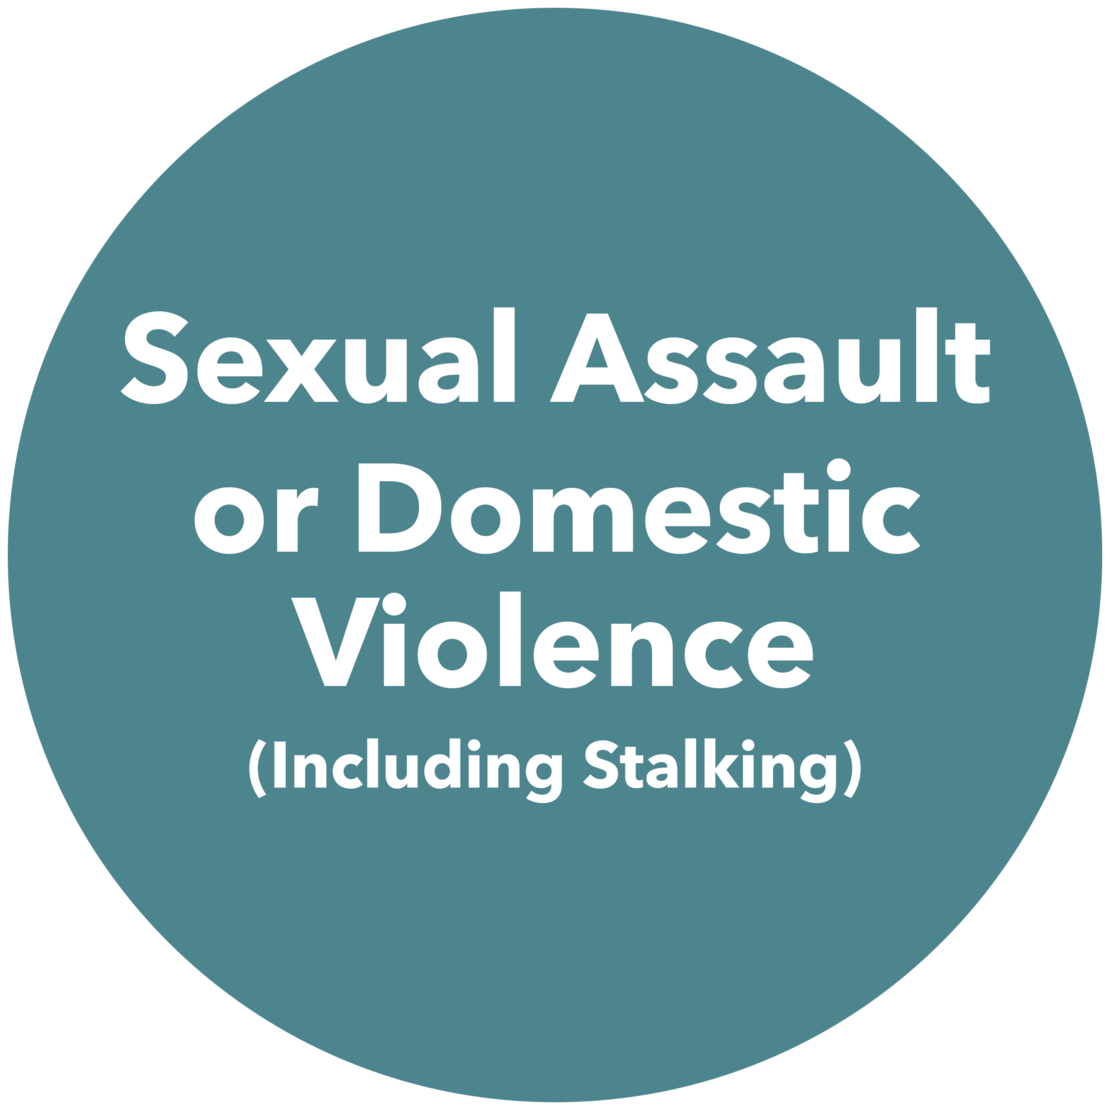 Graphic that reads "Sexual Assault or Domestic Violence, including Stalking"